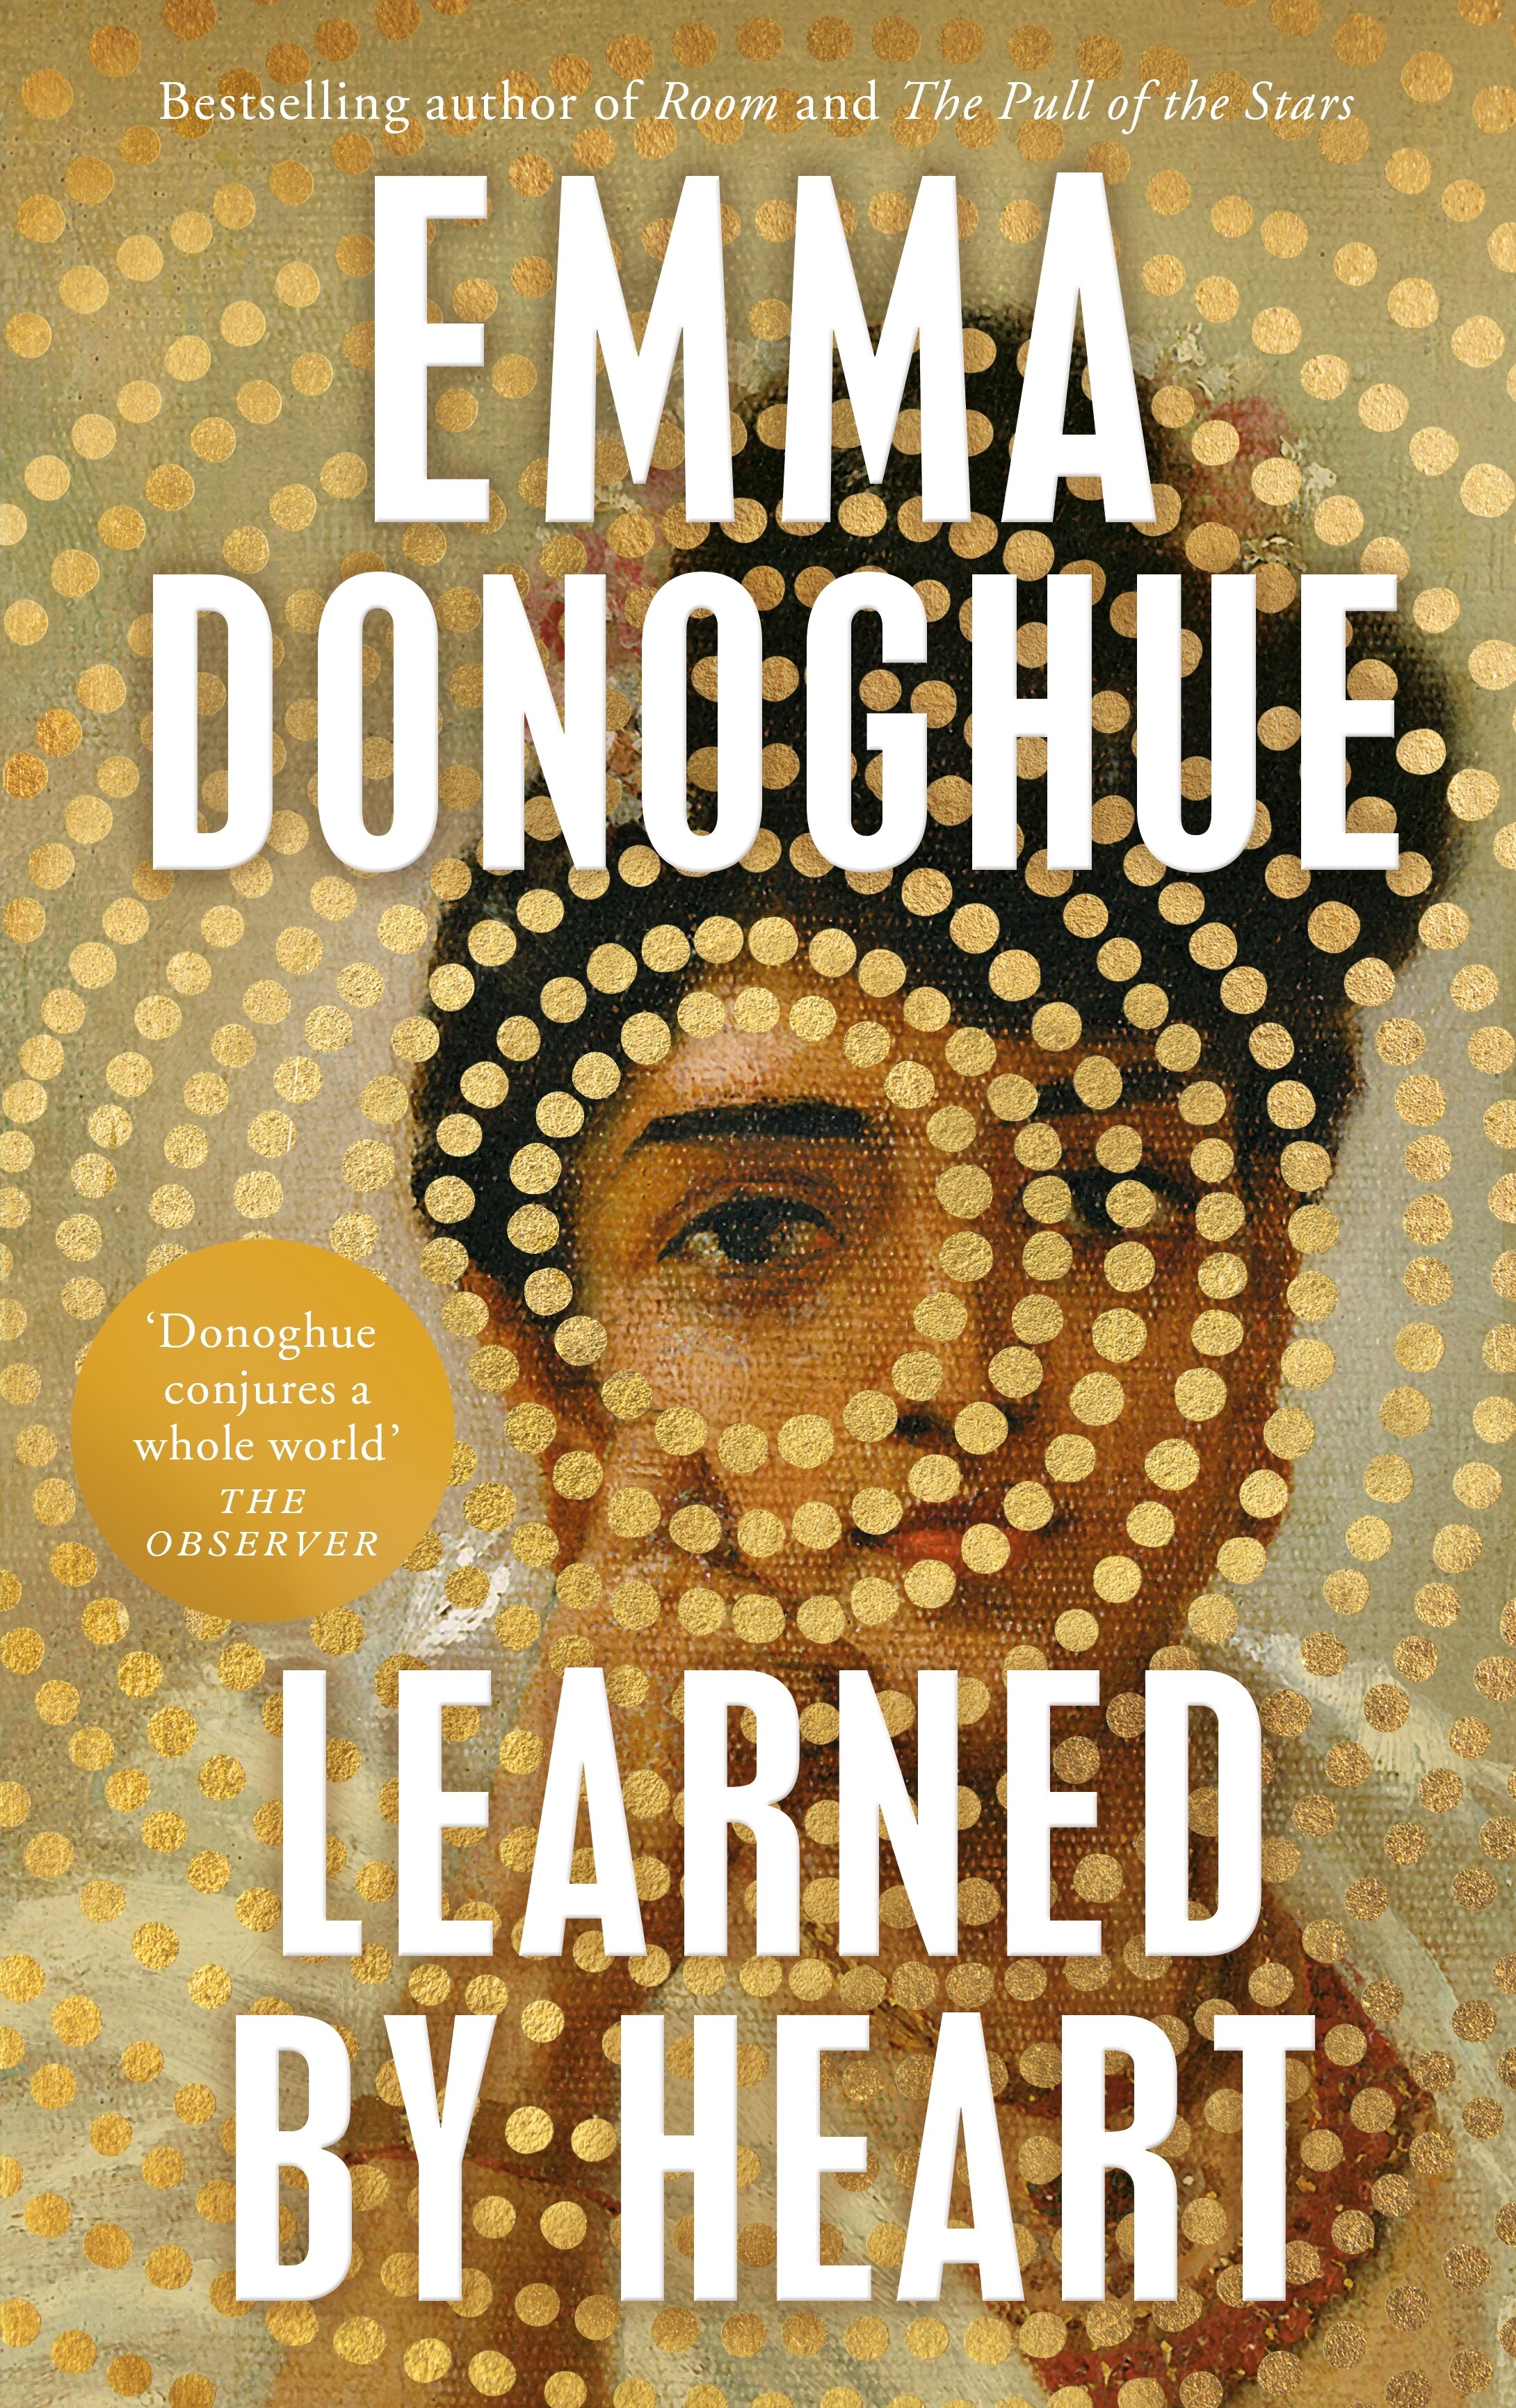 A book cover showing white text over an illustration of a woman covered in concentric circles made up of dots